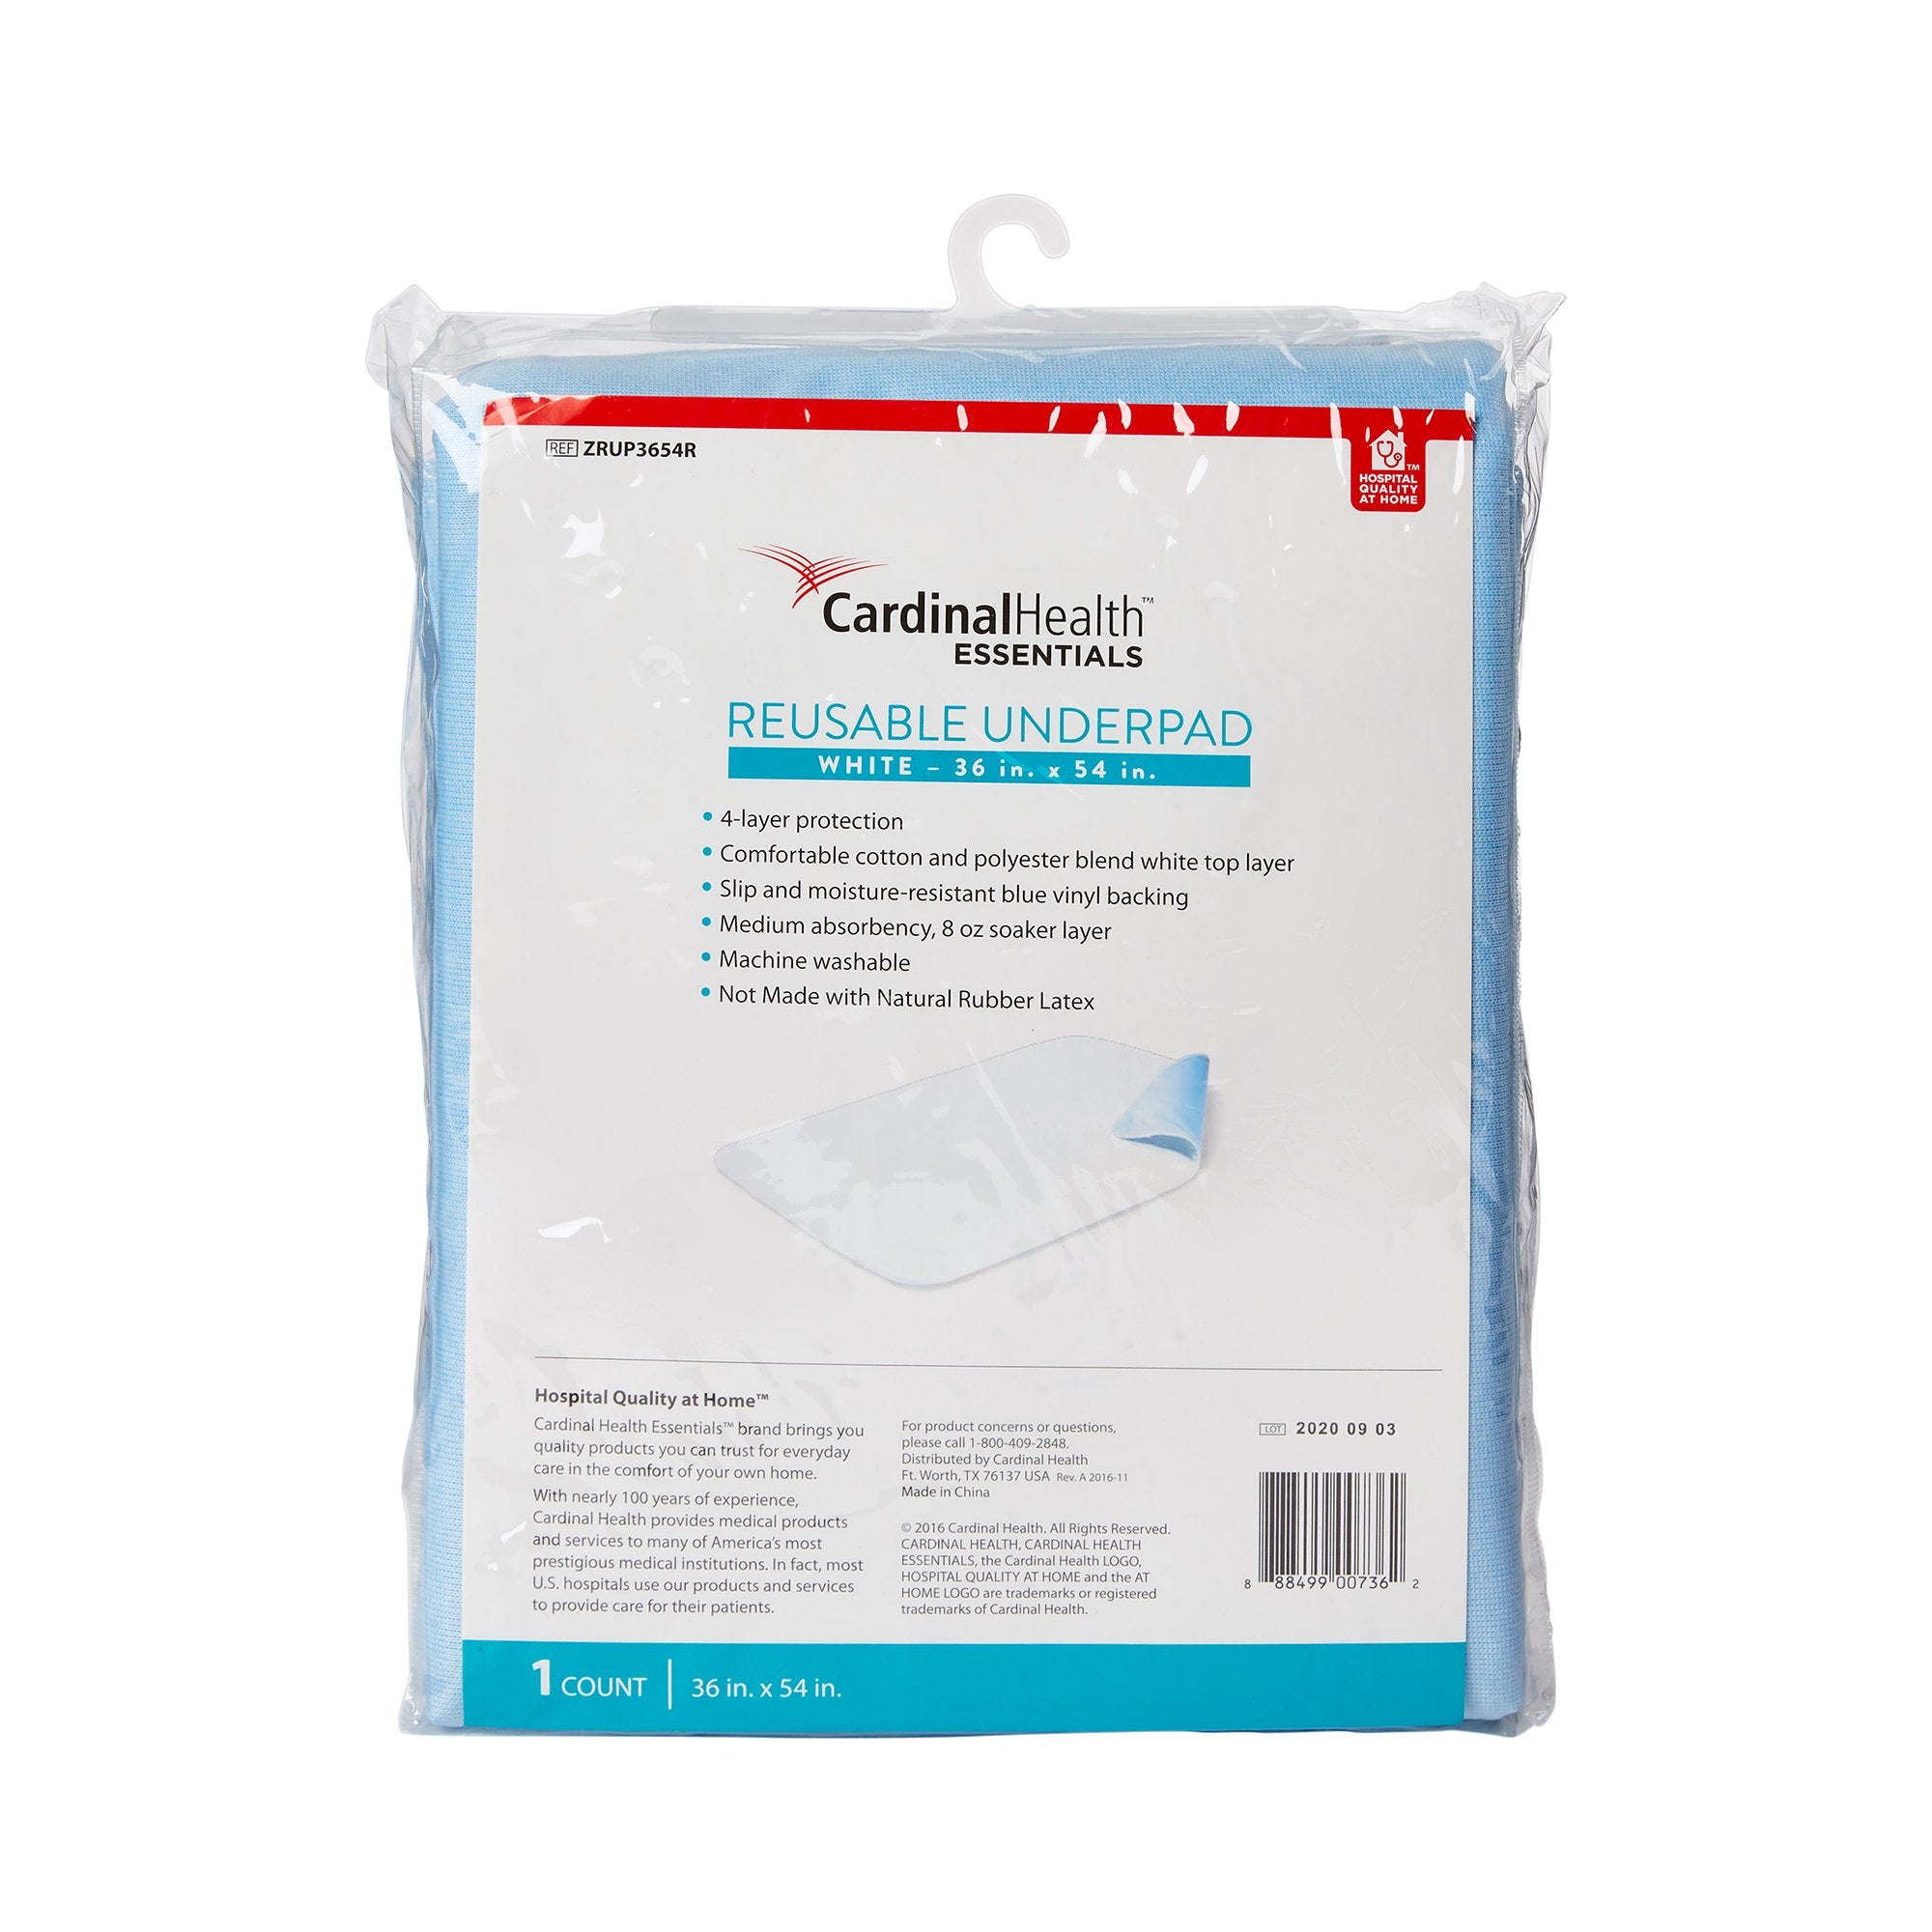 Nebulizer Carry Bag by ReliaMed